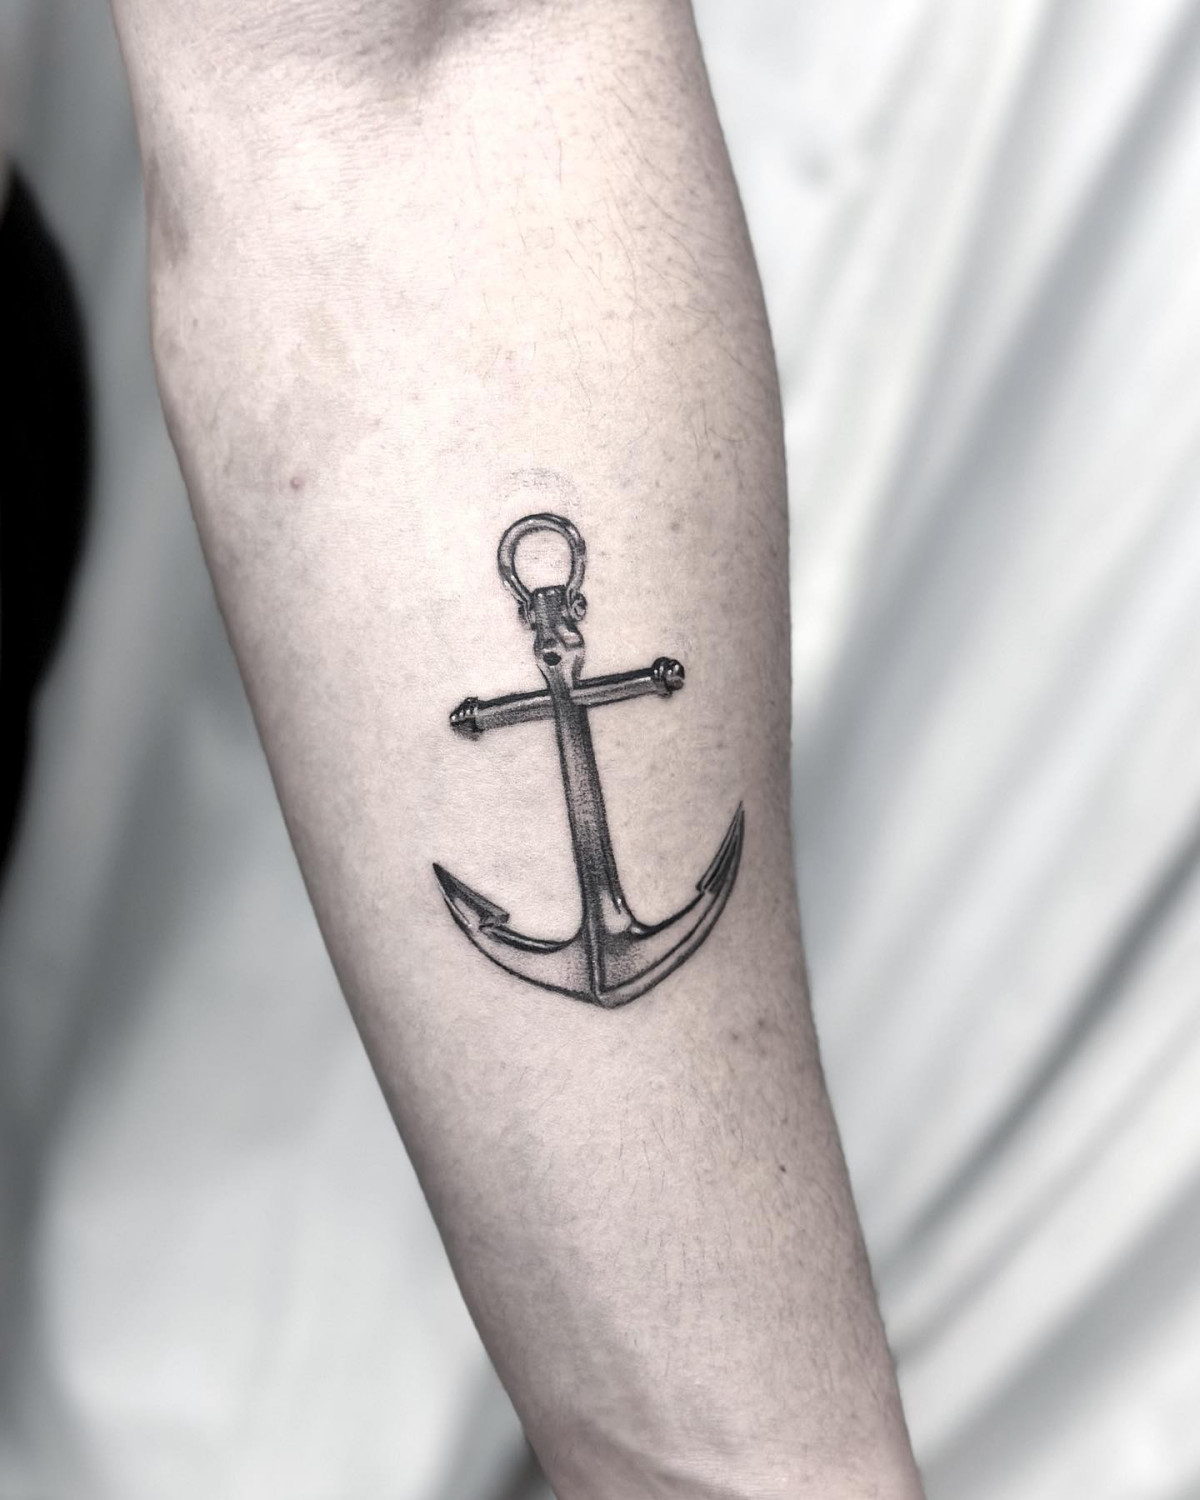 microrealism tattoo of an anchor